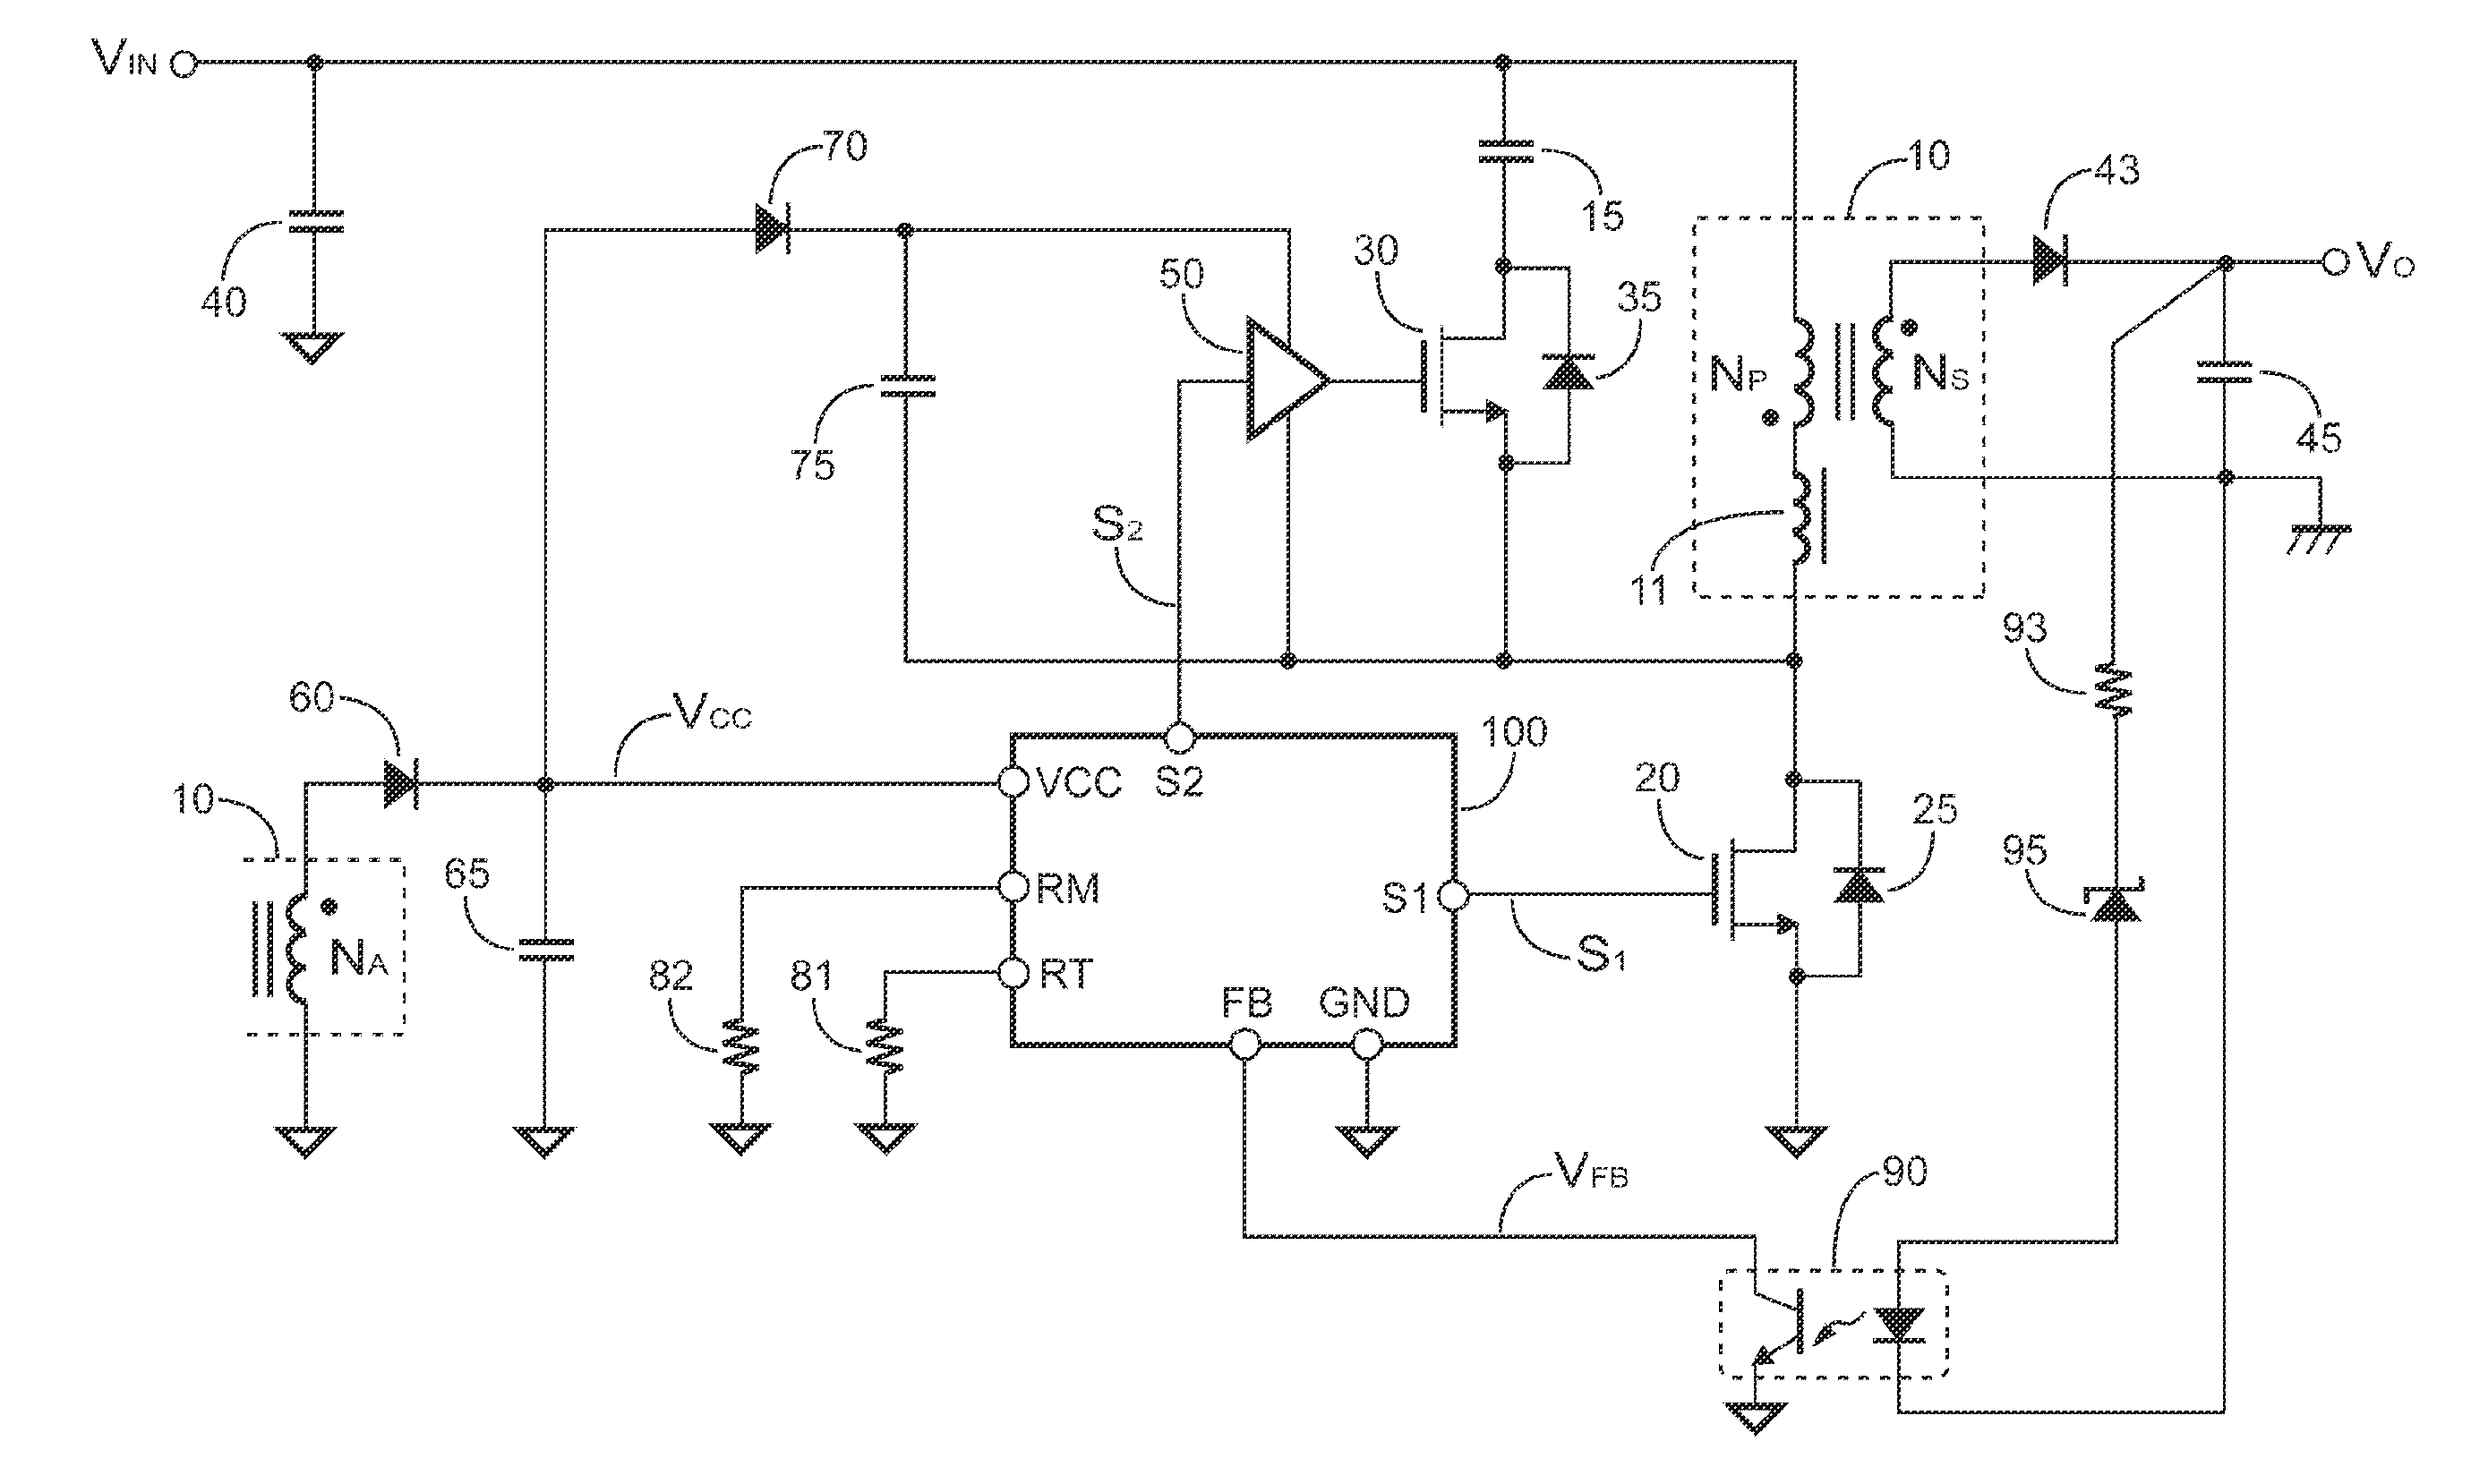 Control circuit for active-clamp flyback power converter with programmable switching period